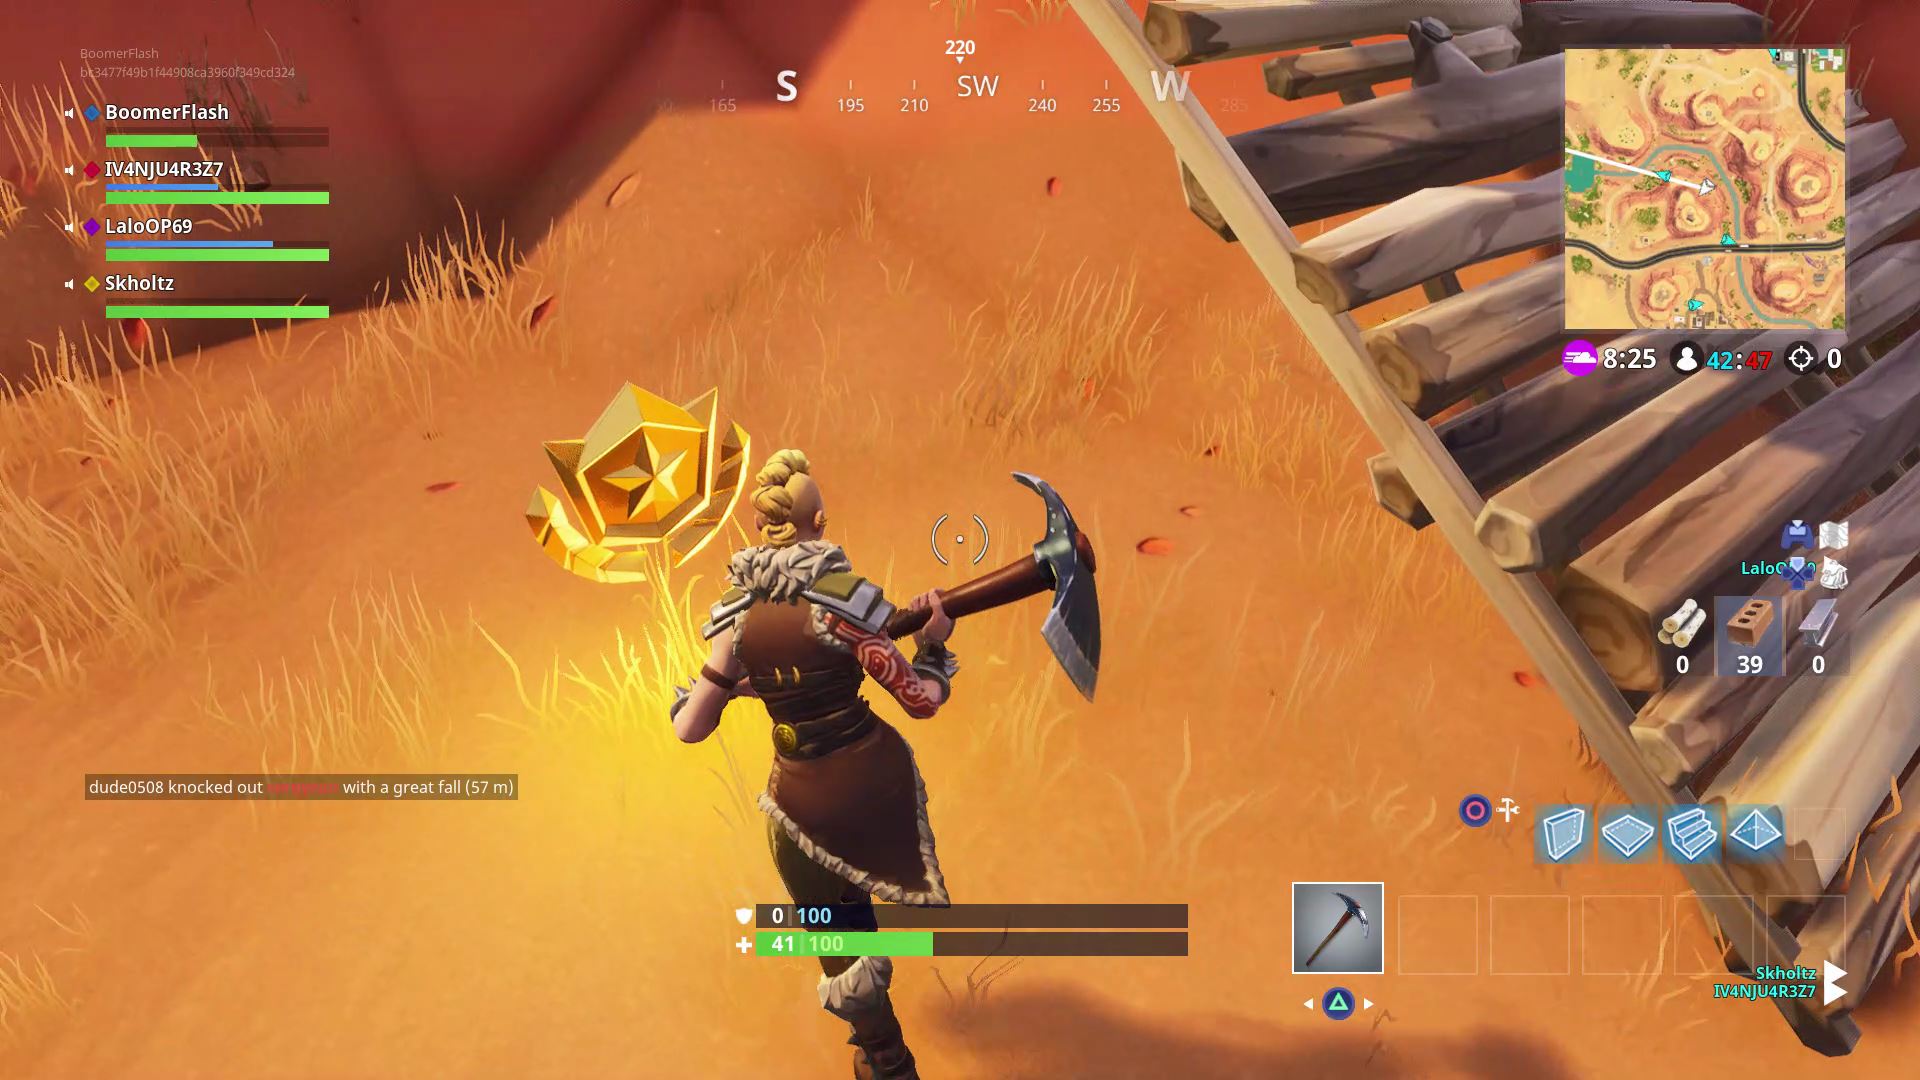 hoop 5 e3 at the bottom of the pickaxe shaped hole in square e3 west of lazy links fortnite battle royale - where are the flaming hoops in fortnite battle royale